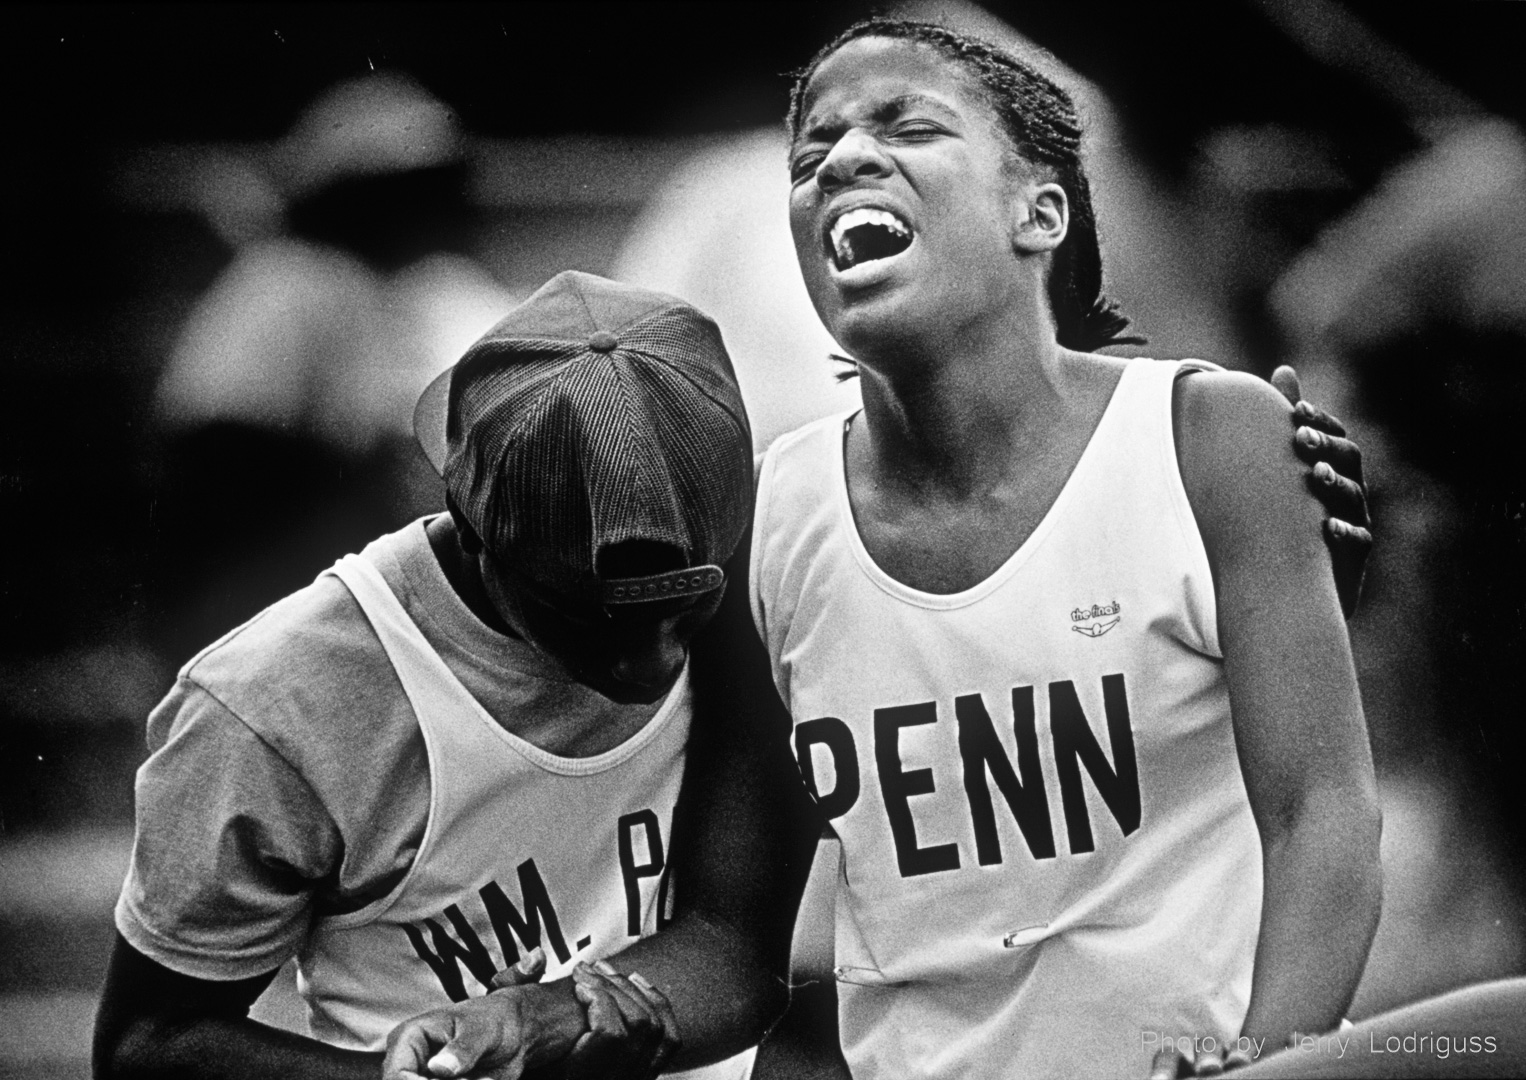 Penn's Marcia Rush, in agony after winning the women's 400 meter run during the 1988 Penn Relays, in comforted by a teammate.